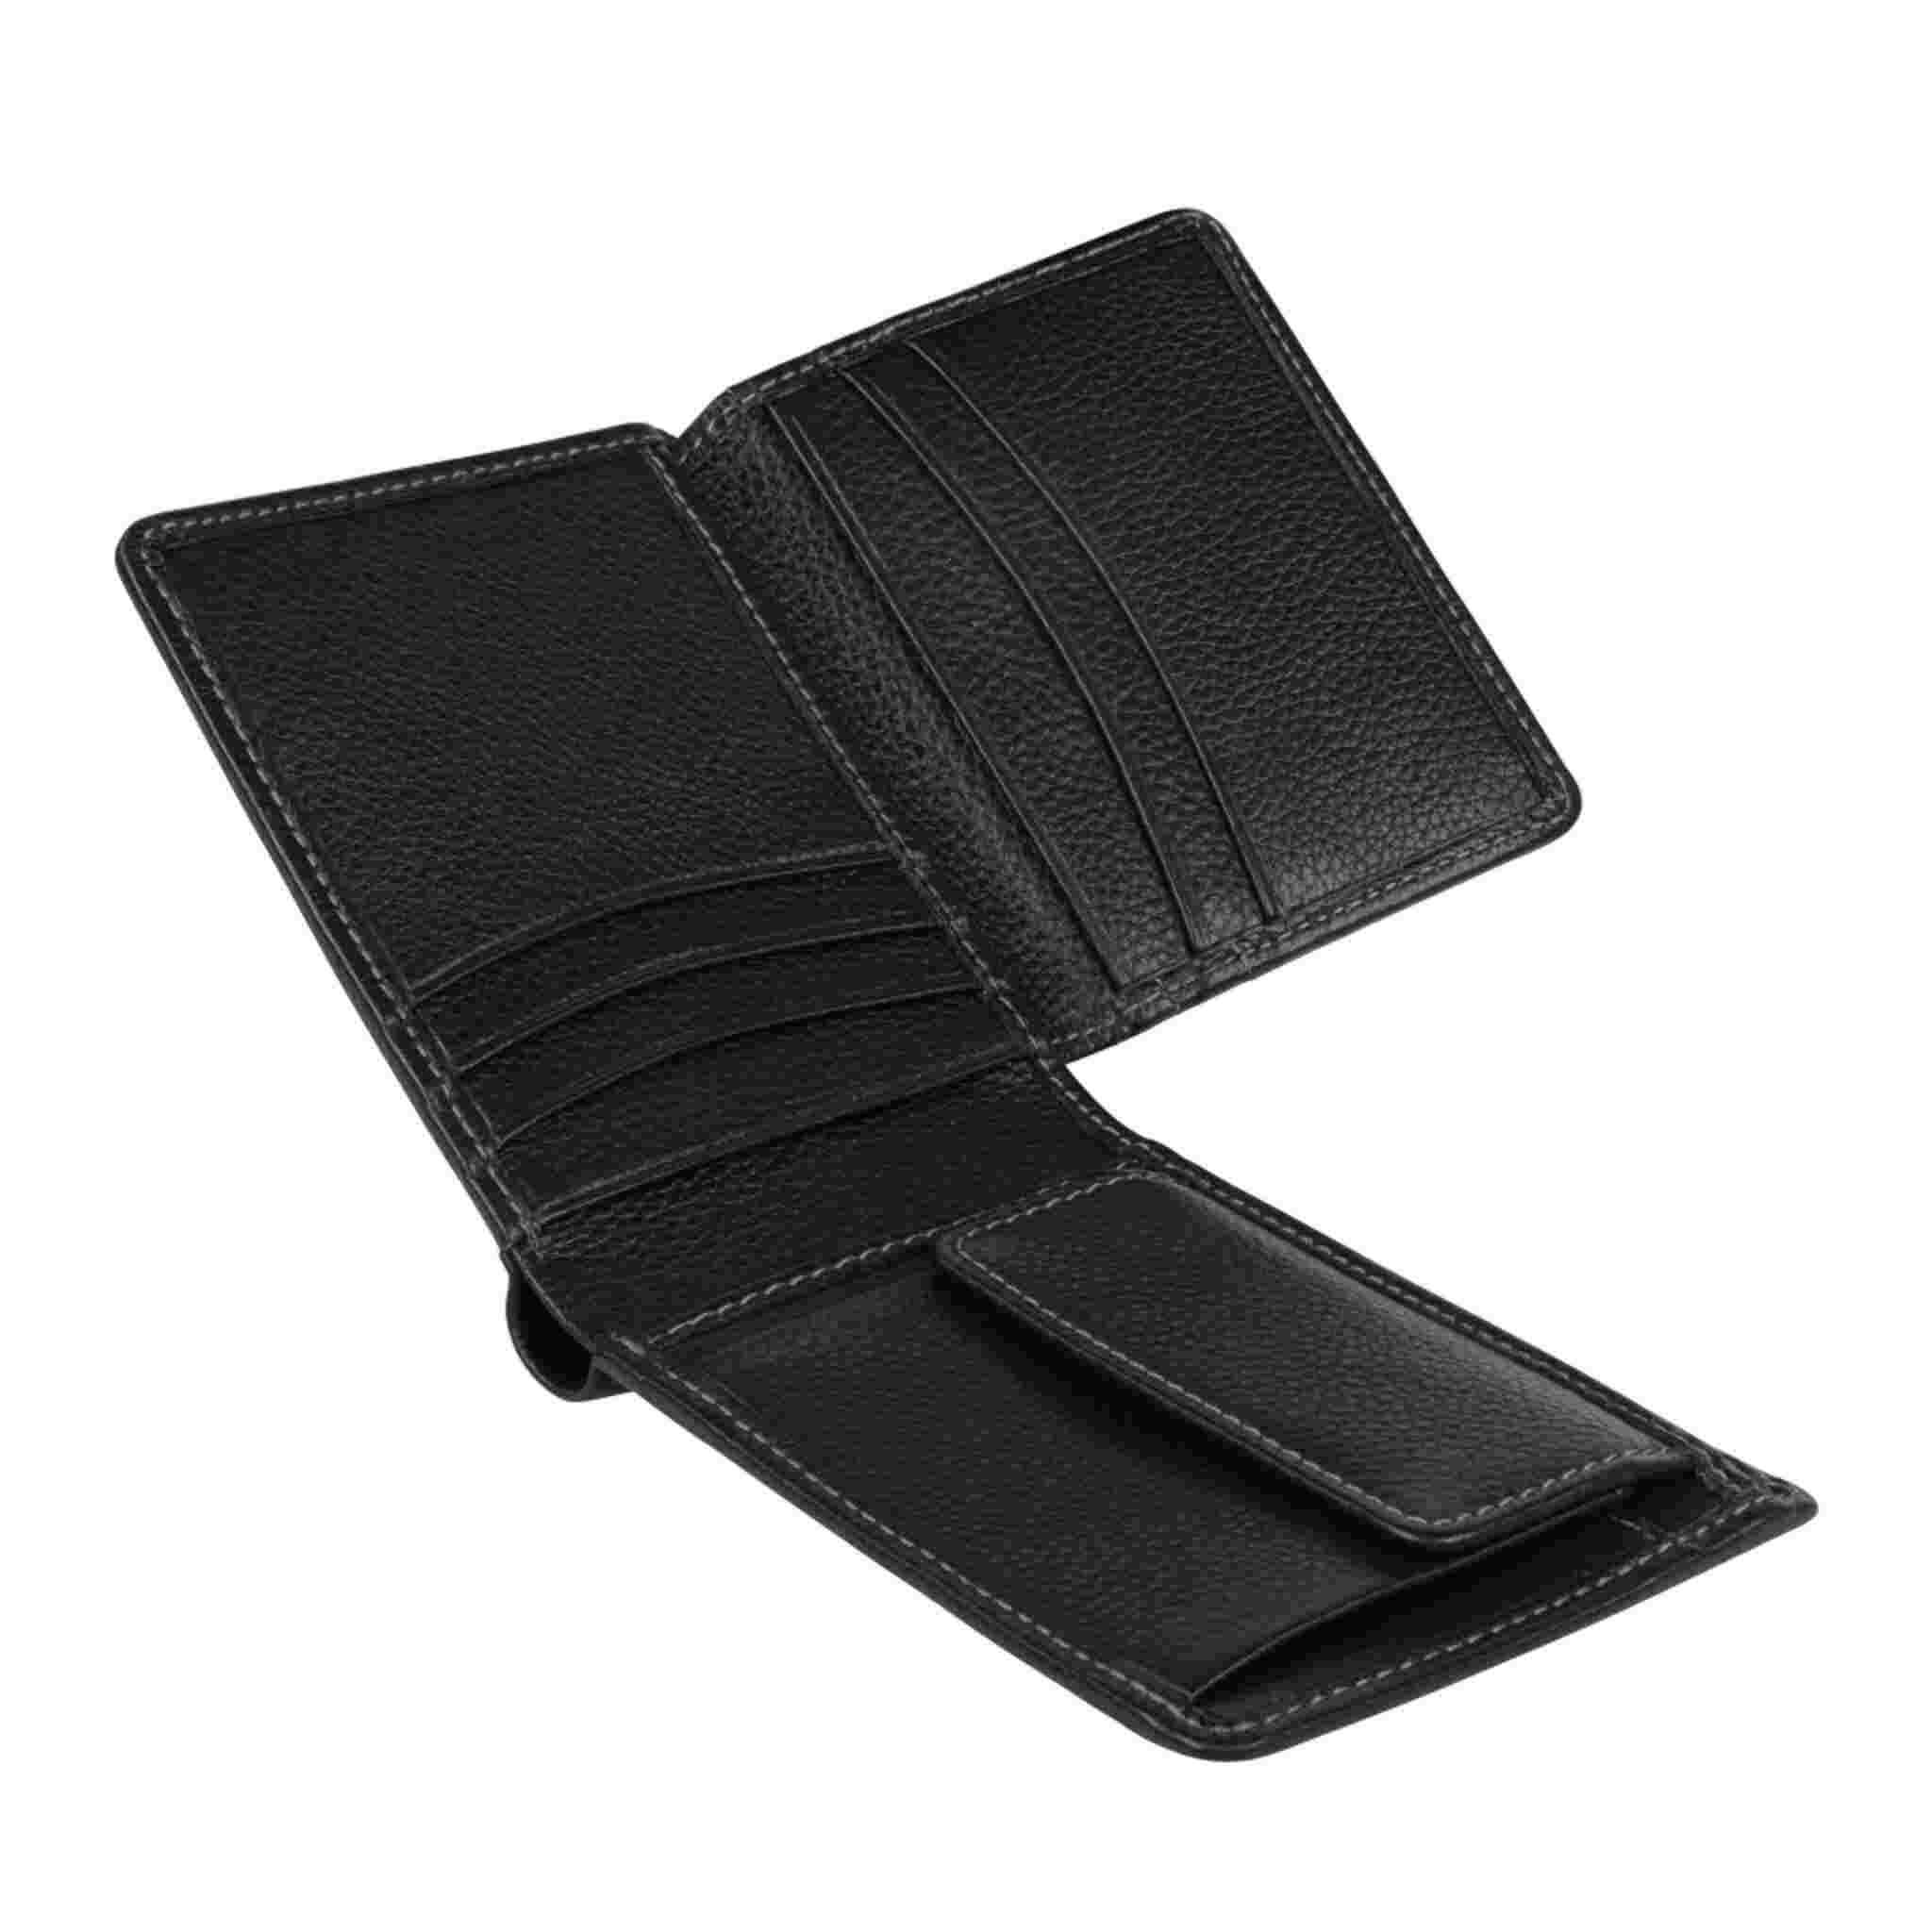 Open black wallet showing cash section and card holders